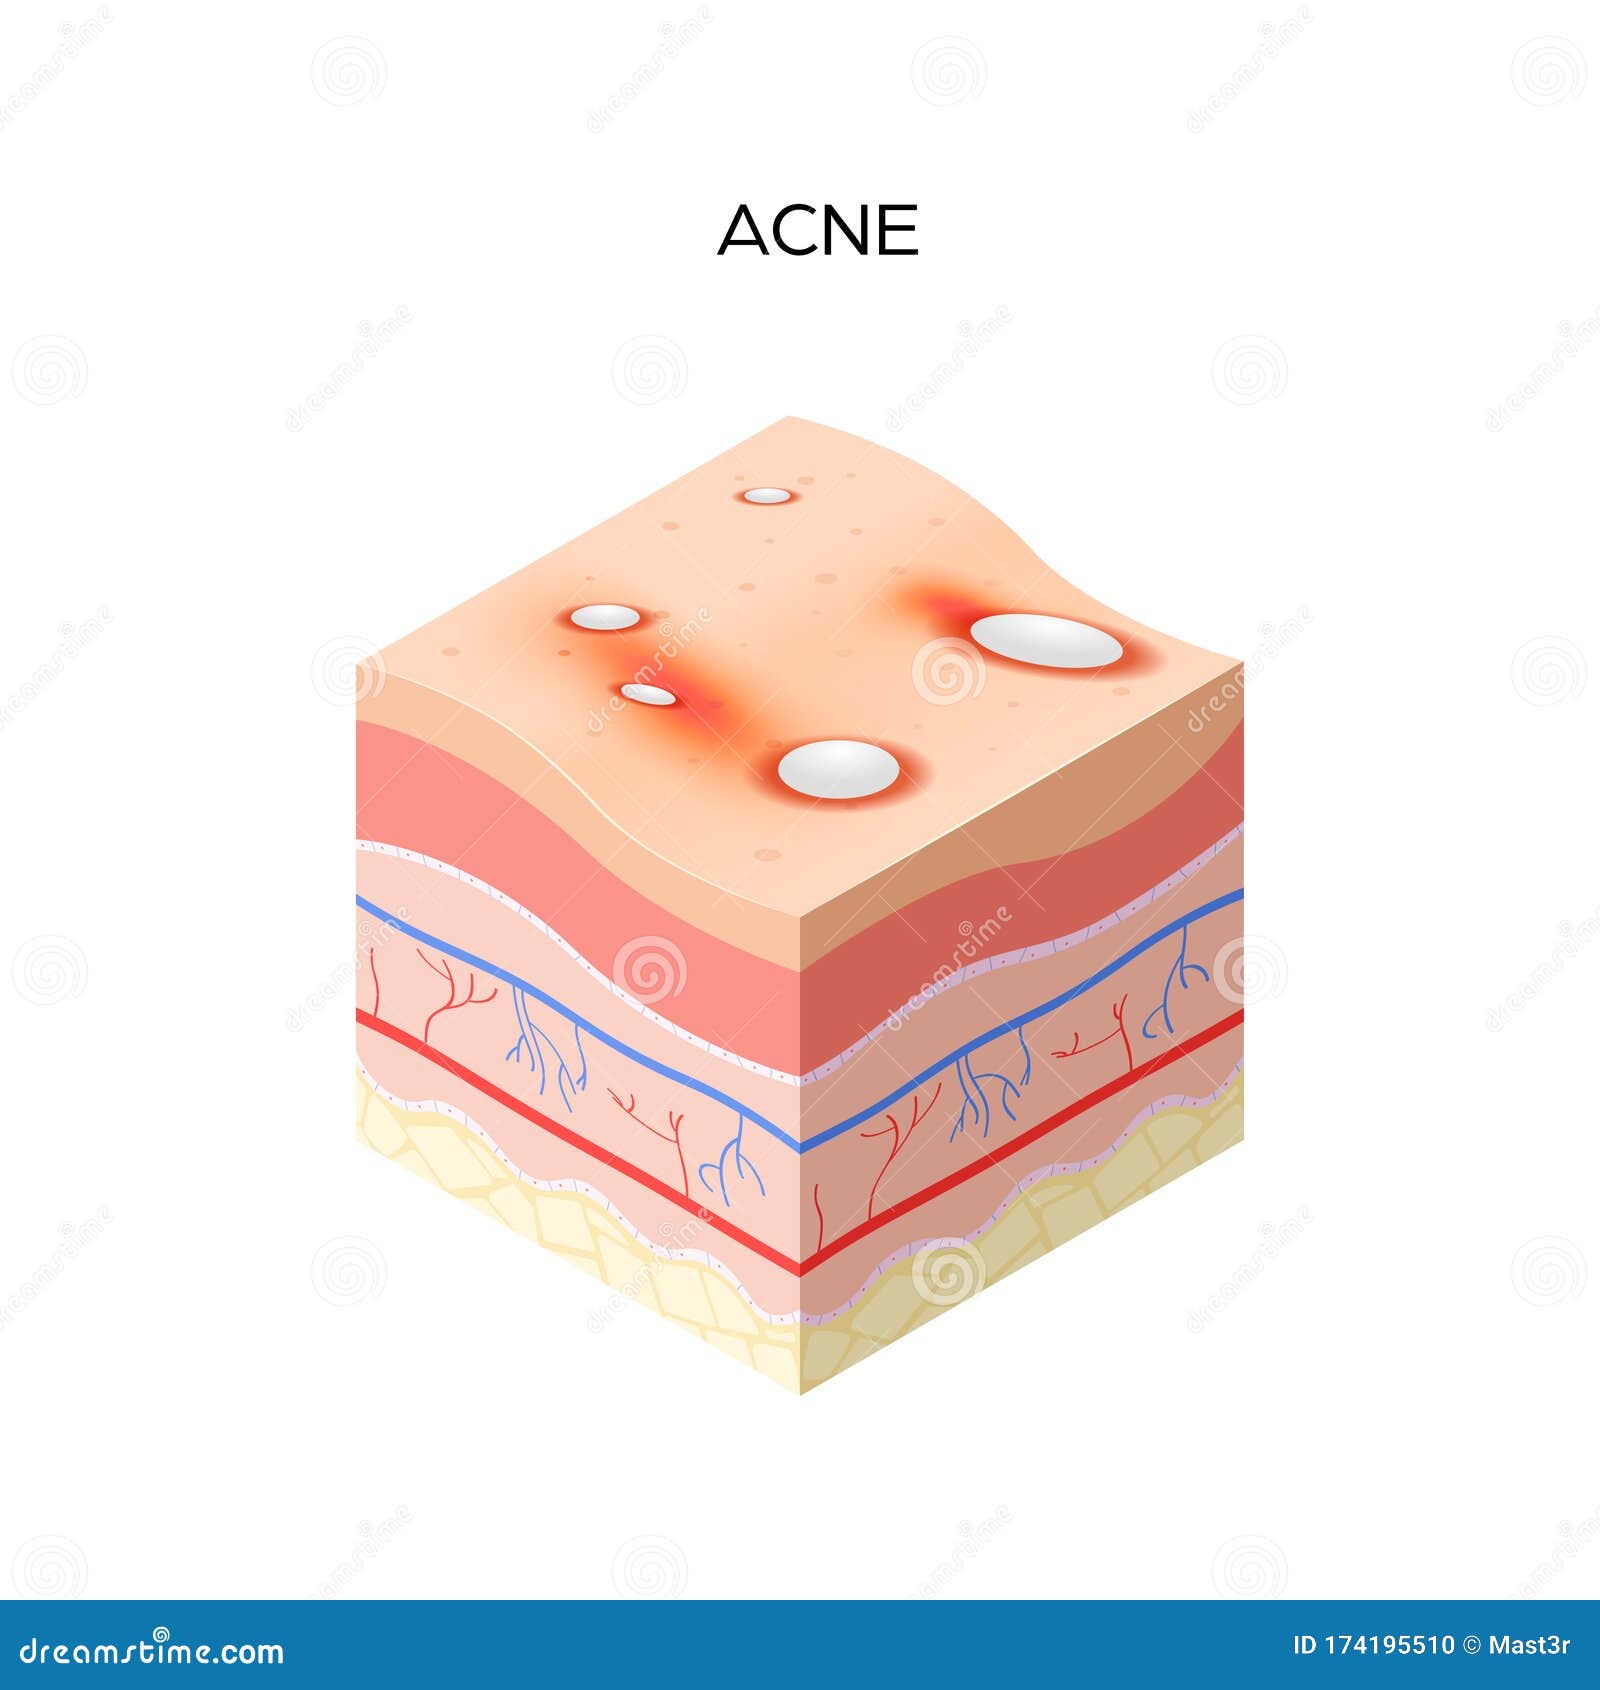 Acne Vulgaris or Pimple Cross-section of Human Skin Layers Structure ...